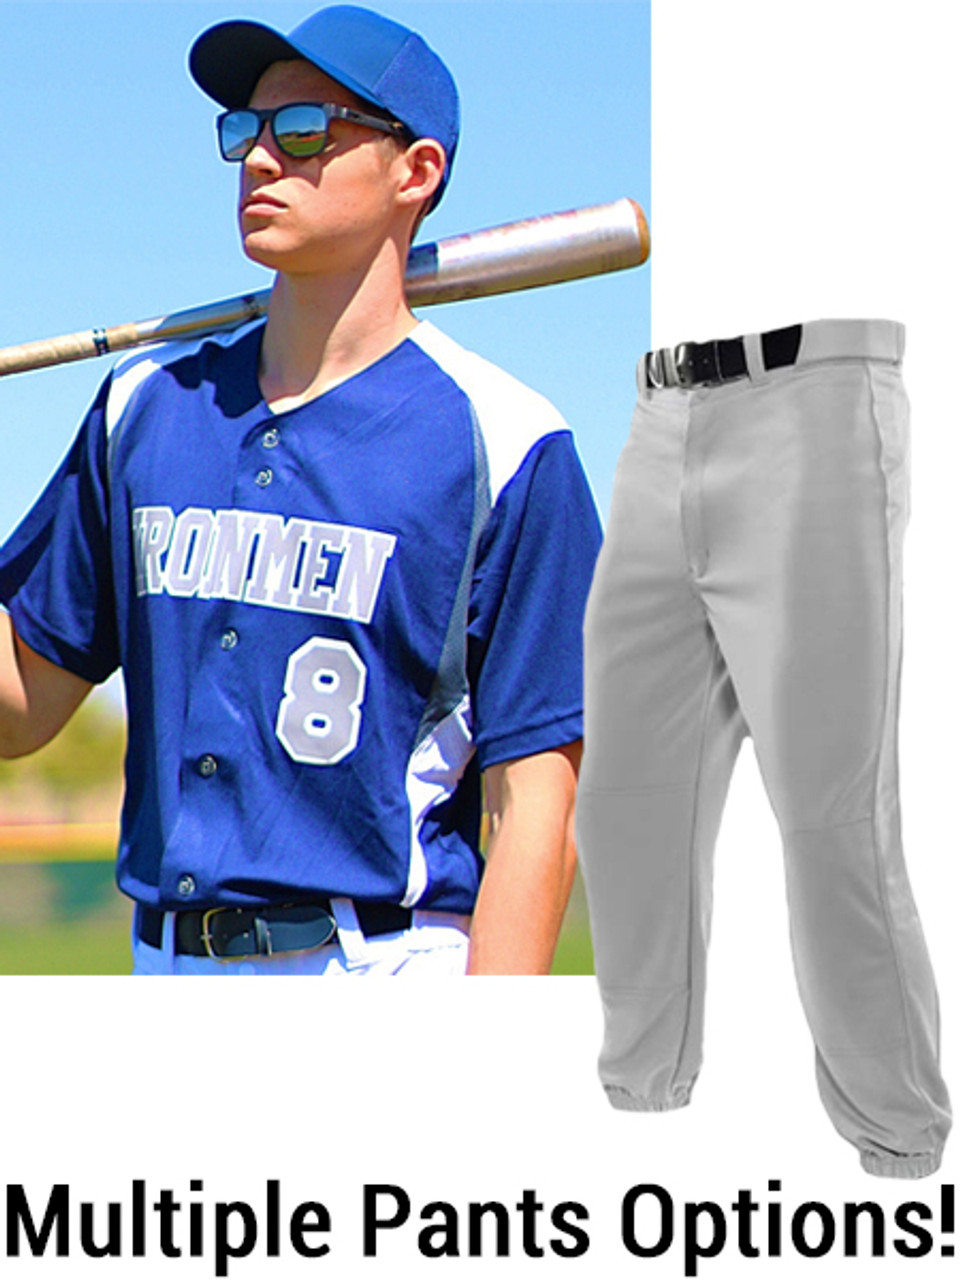 Does Your League Include Pants With Your Uniform